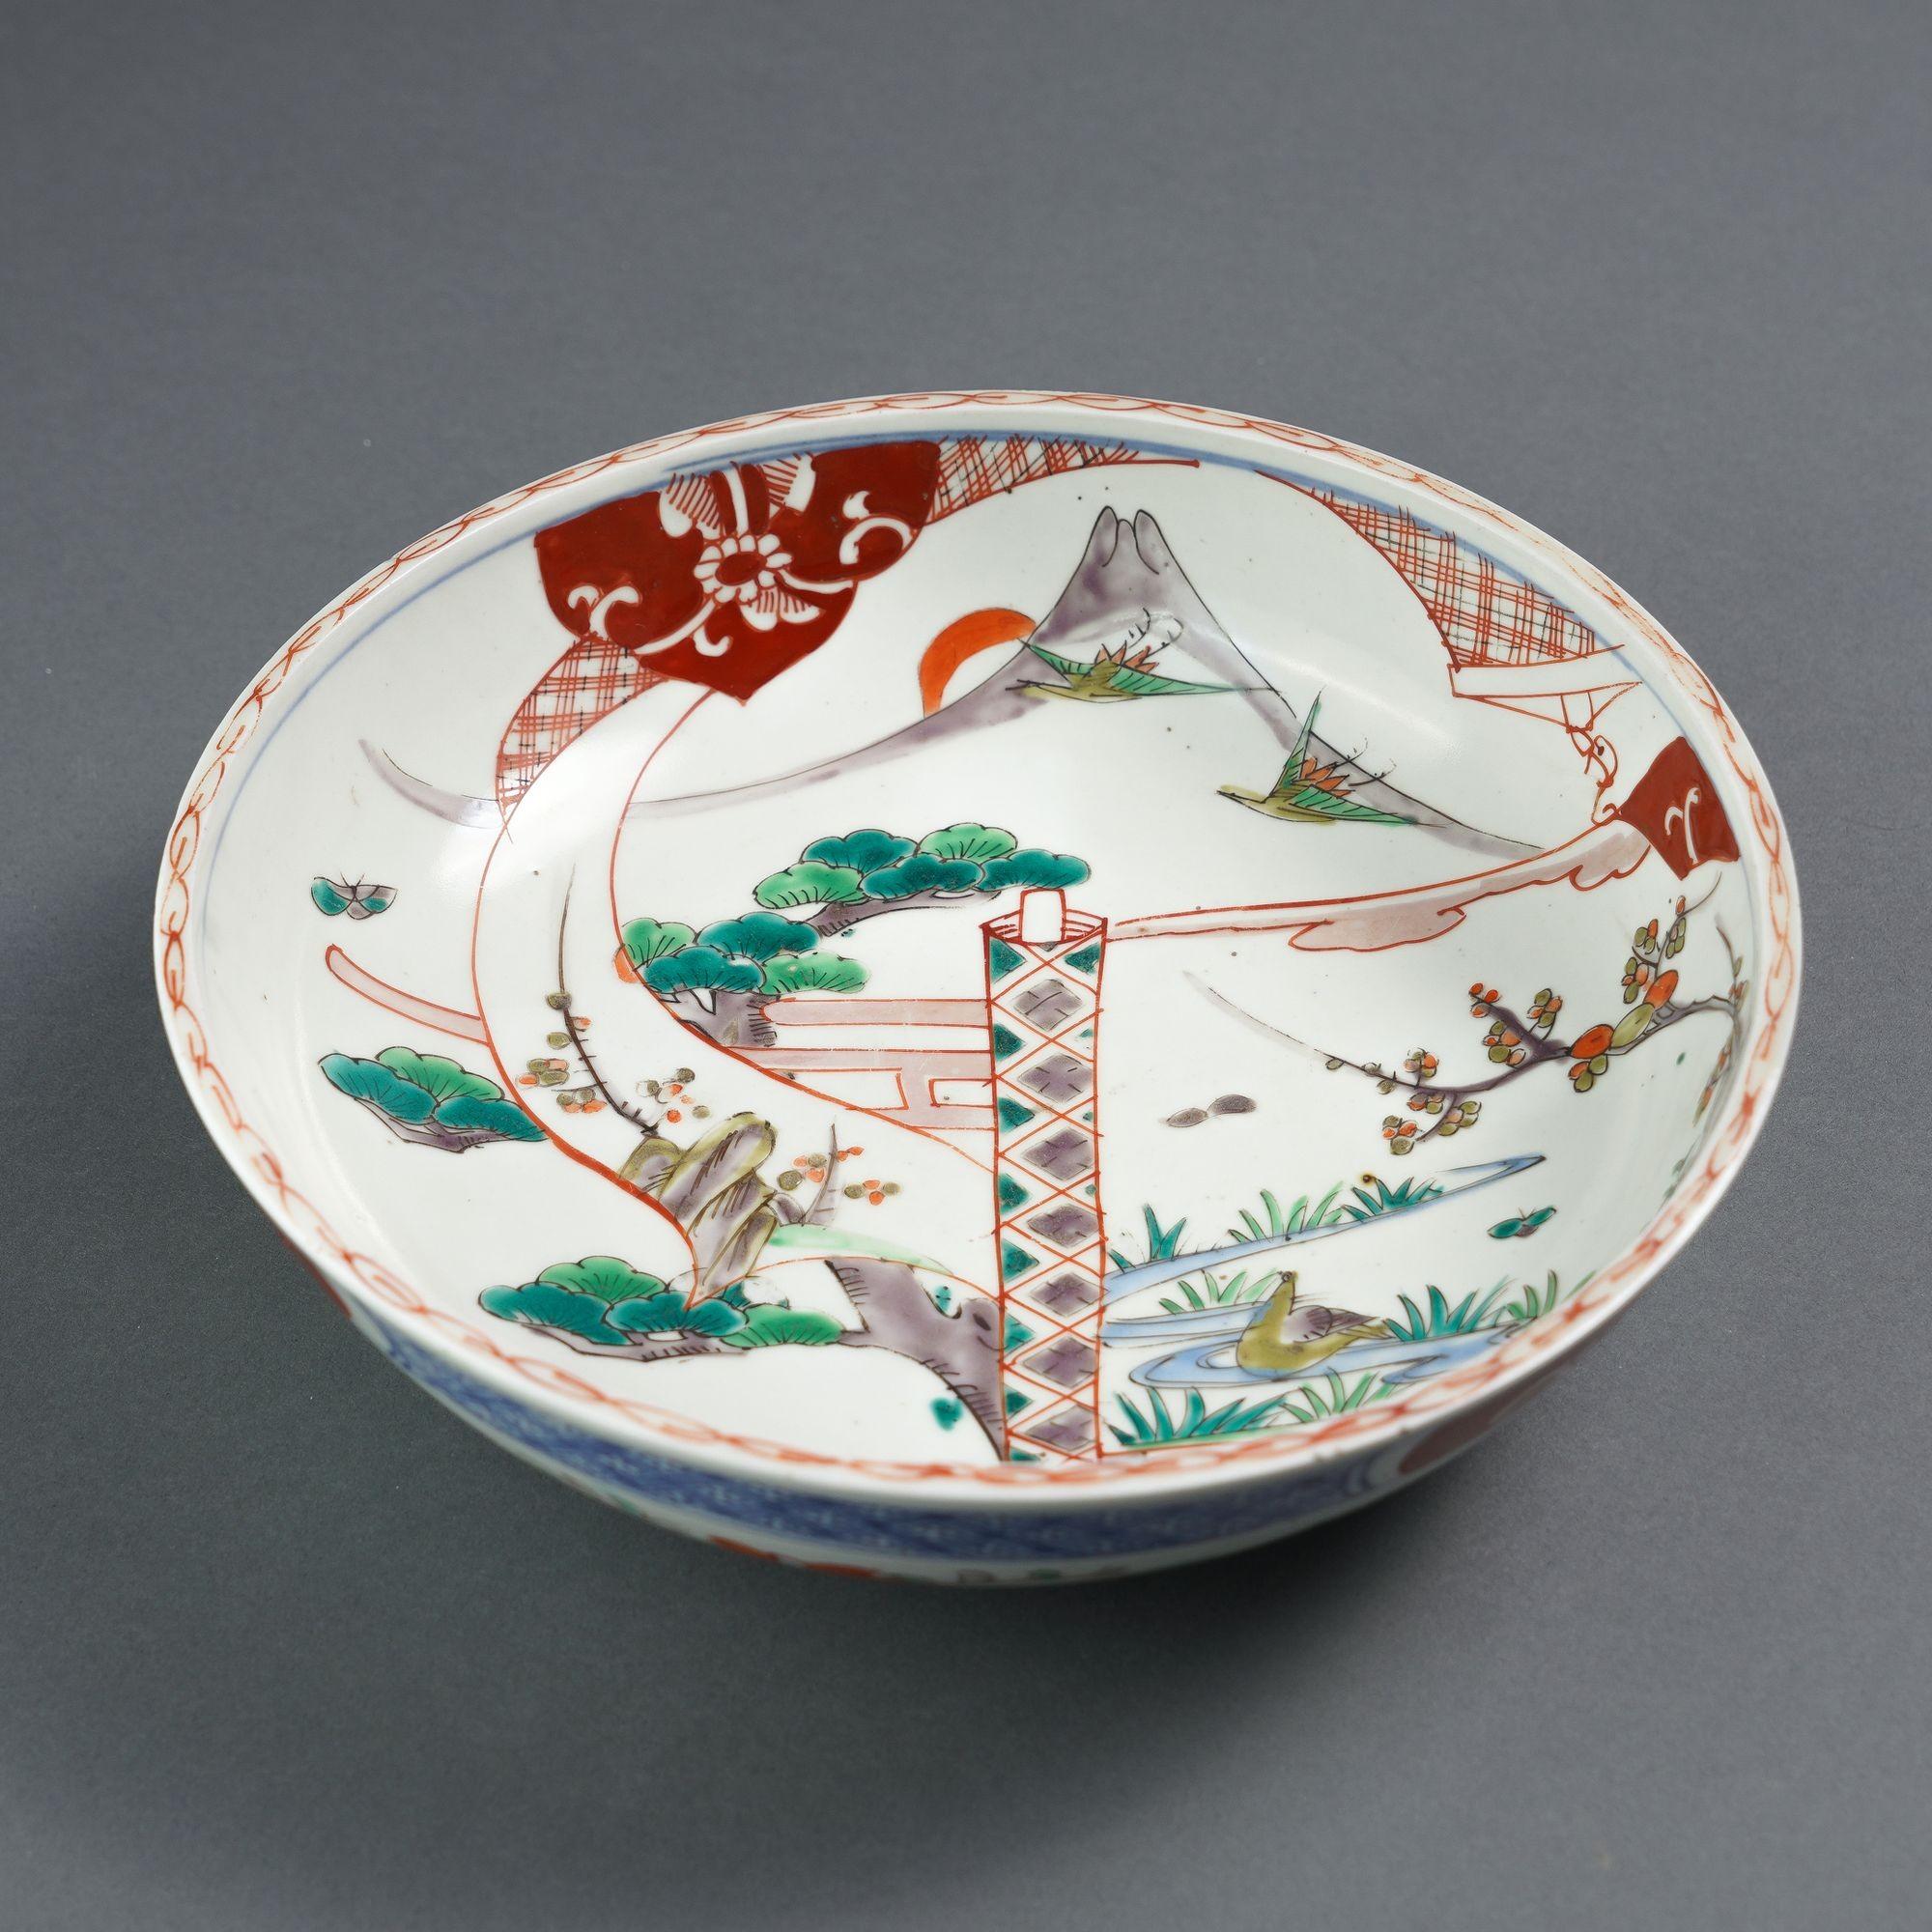 Imari palette shallow bowl decorated in Imari colors simulating the Chinese famille verte palette (green with accents of aubergine, oxide red and underglaze blue). The interior of the bowl is decorated with segmented images of mountain, a stream,